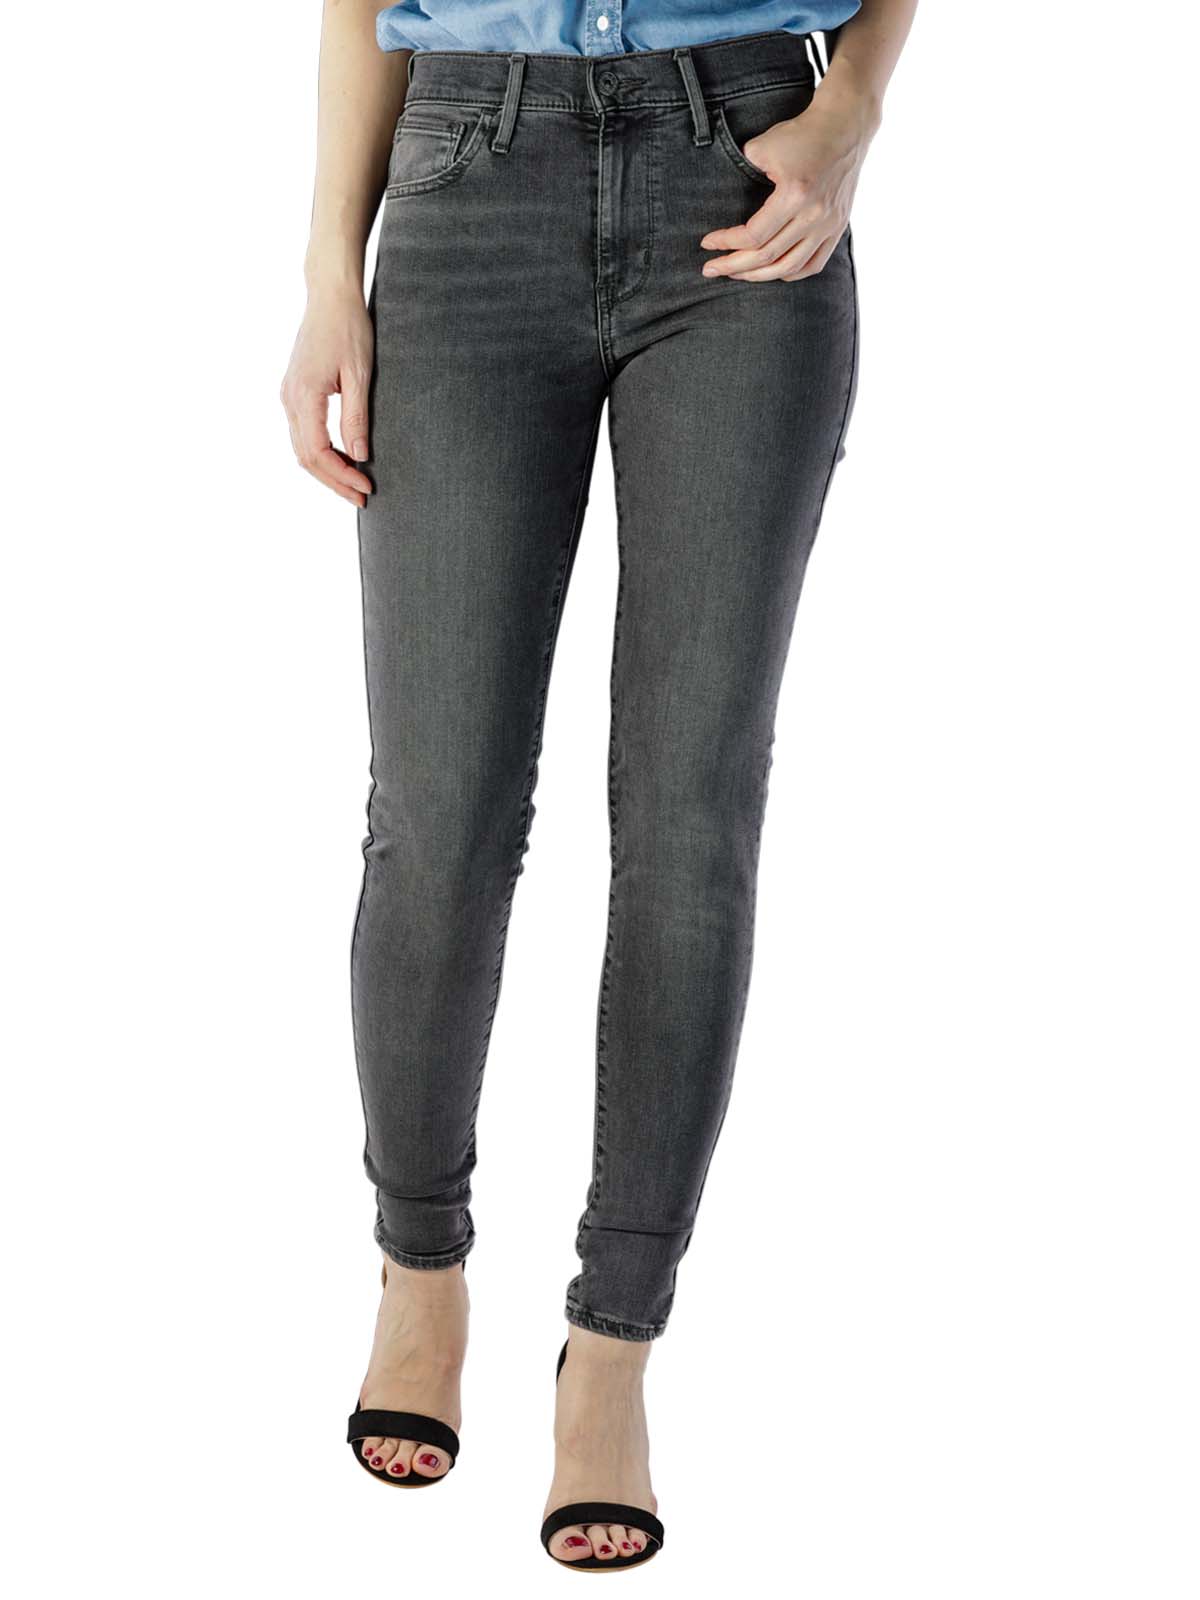 Levi's 720 High Rise Super Skinny Jeans fingers crossed Levi's Women's Jeans  | Free Shipping on  - SIMPLY LOOK GOOD